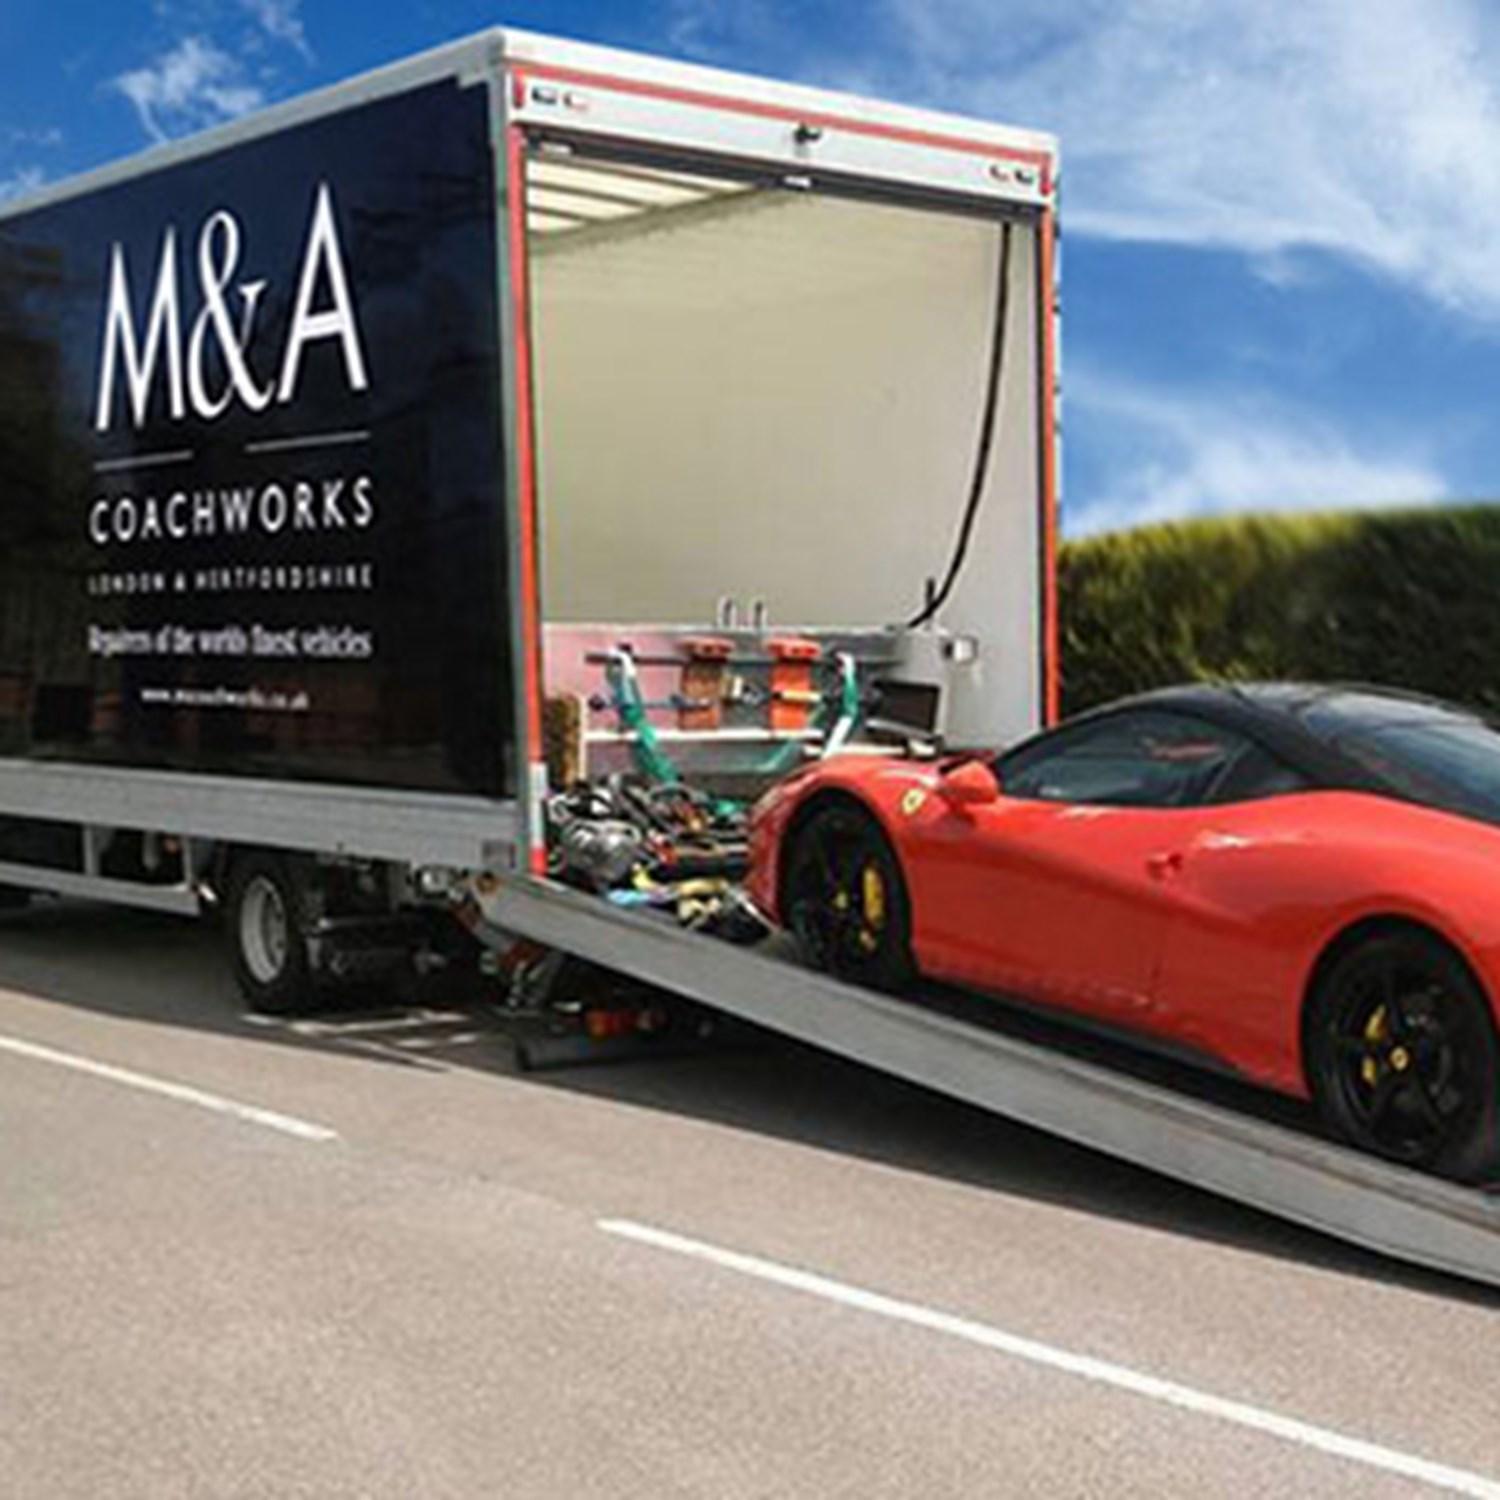 Sports car being loaded onto lorry